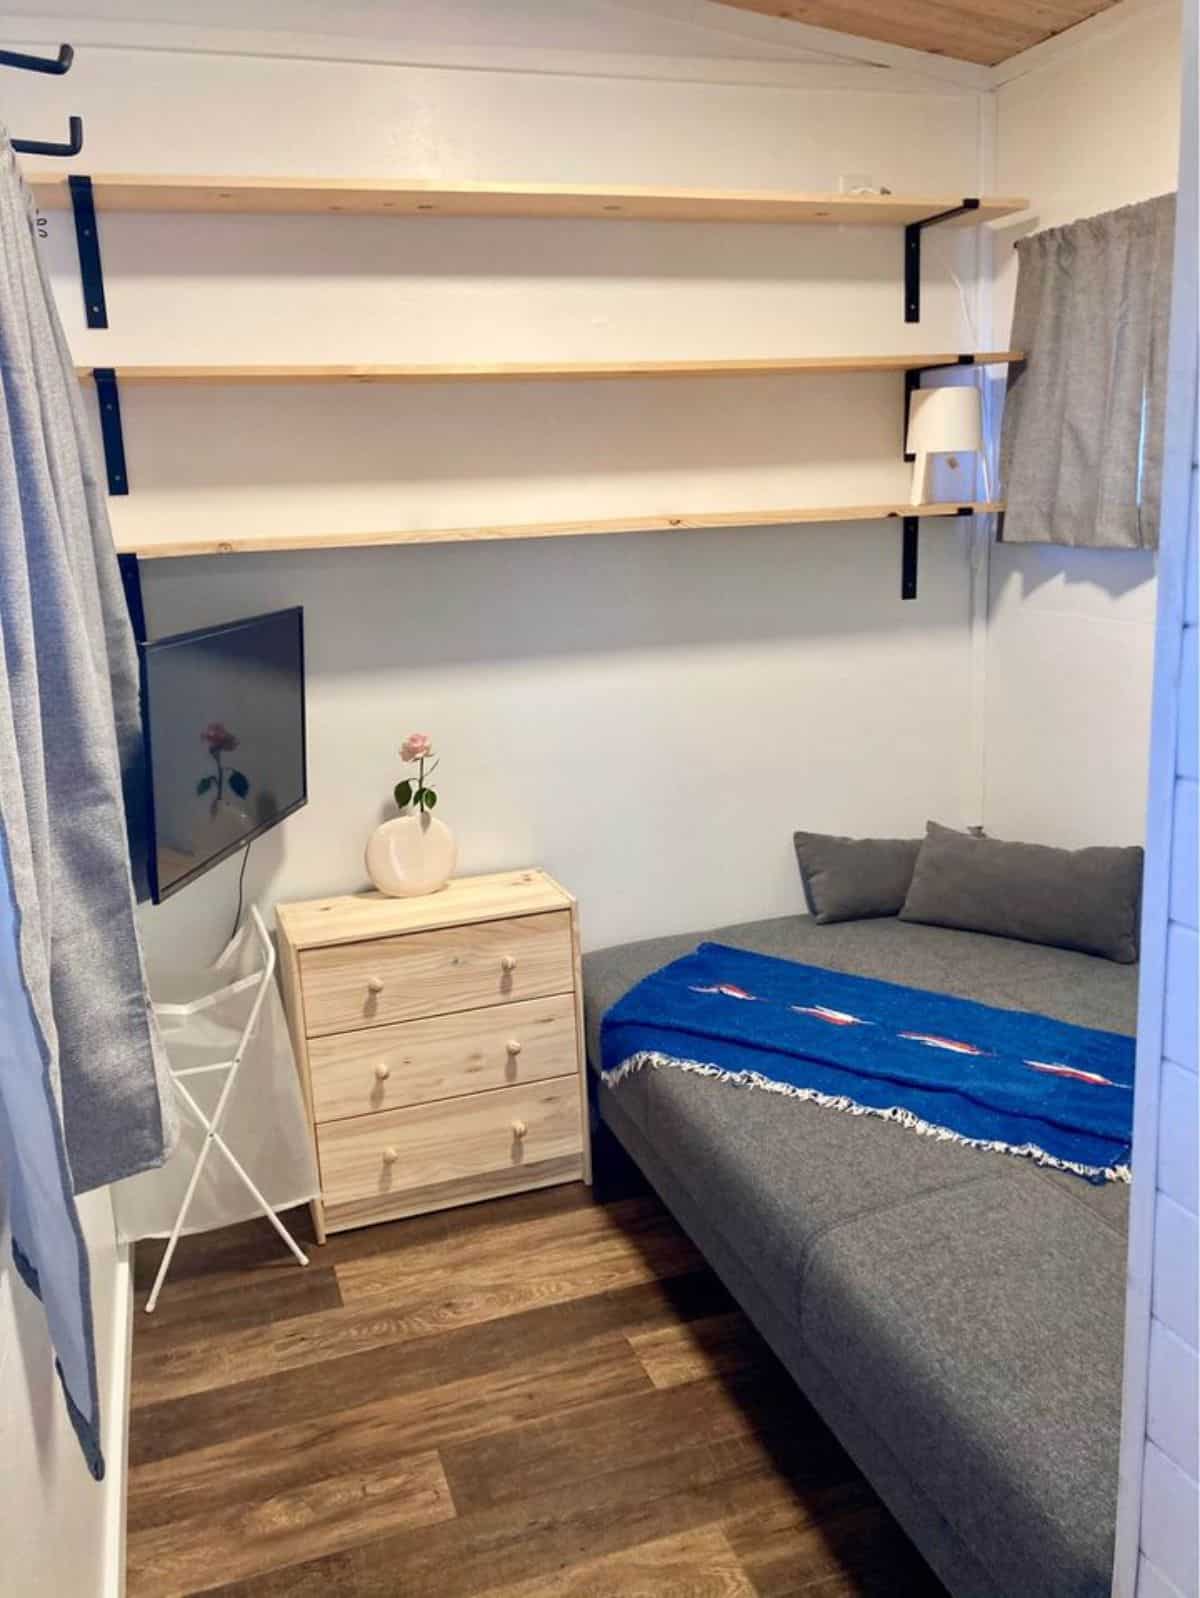 Living cum bedroom has a small bed, television set, side drawers and storage cabinets